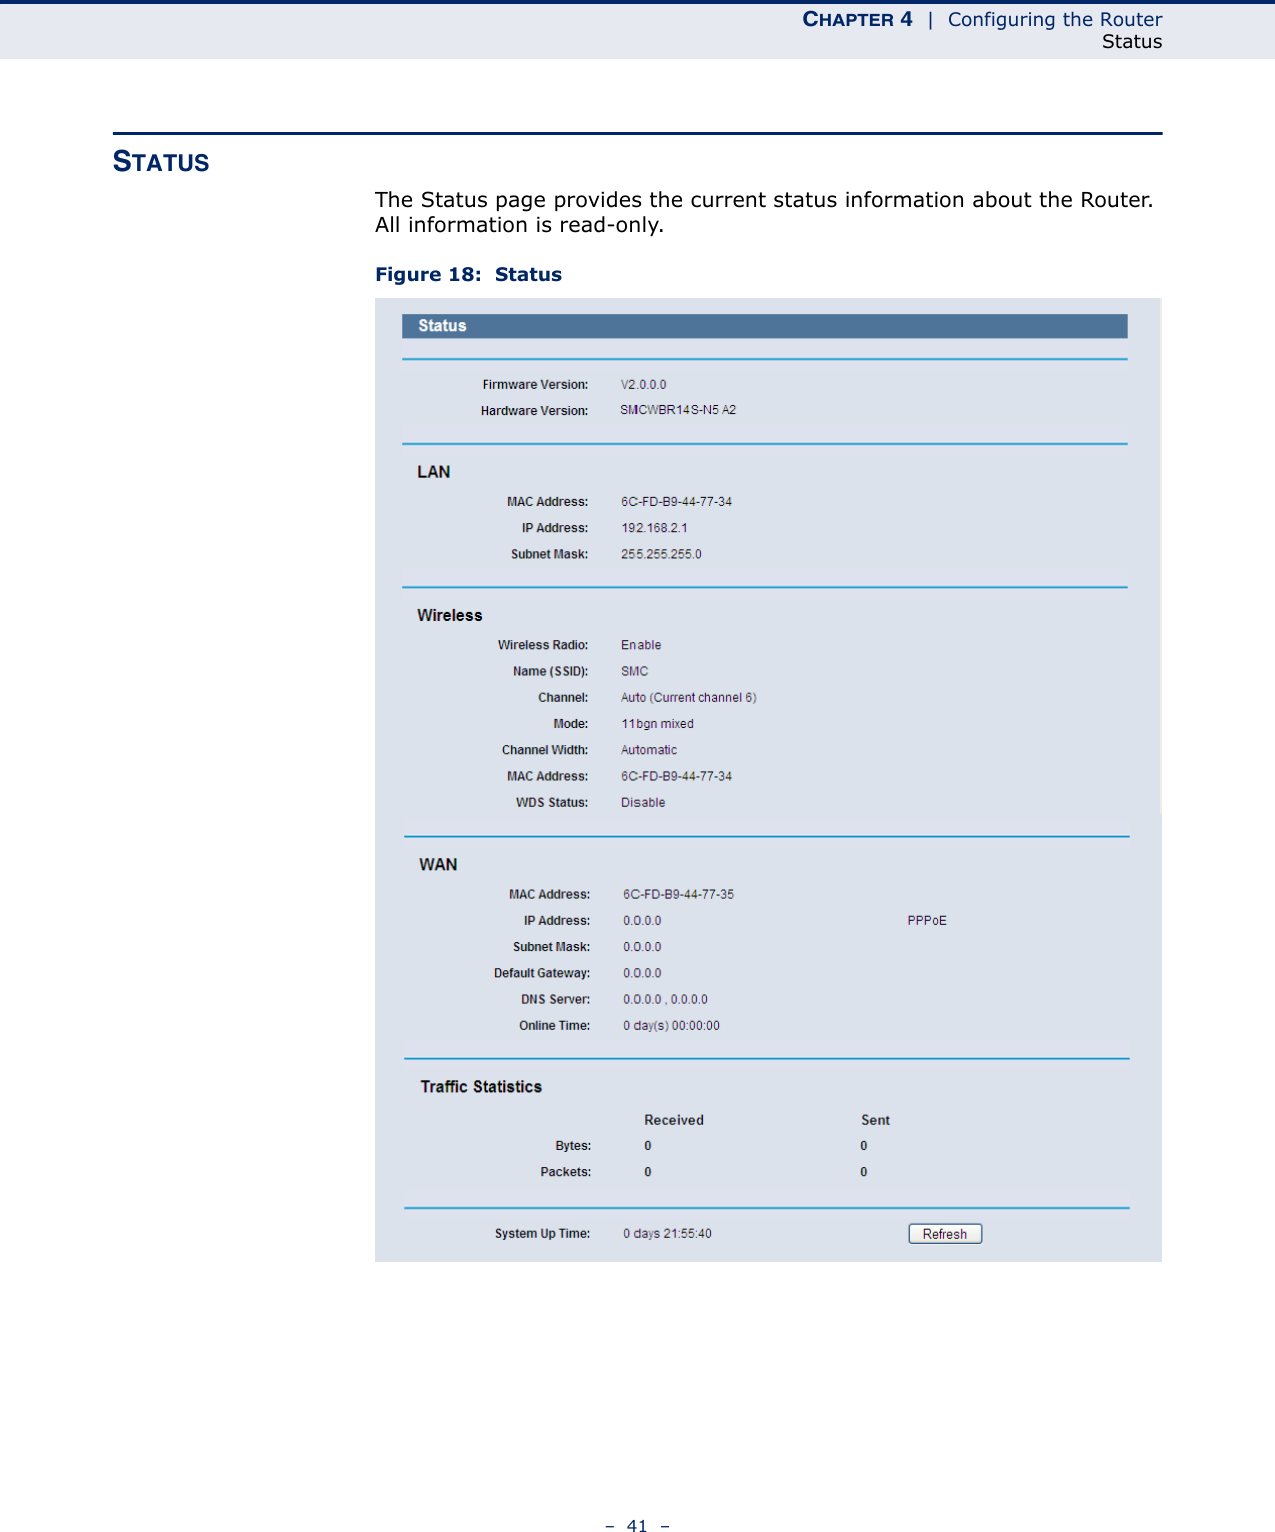 CHAPTER 4  |  Configuring the RouterStatus–  41  –STATUSThe Status page provides the current status information about the Router. All information is read-only.Figure 18:  Status